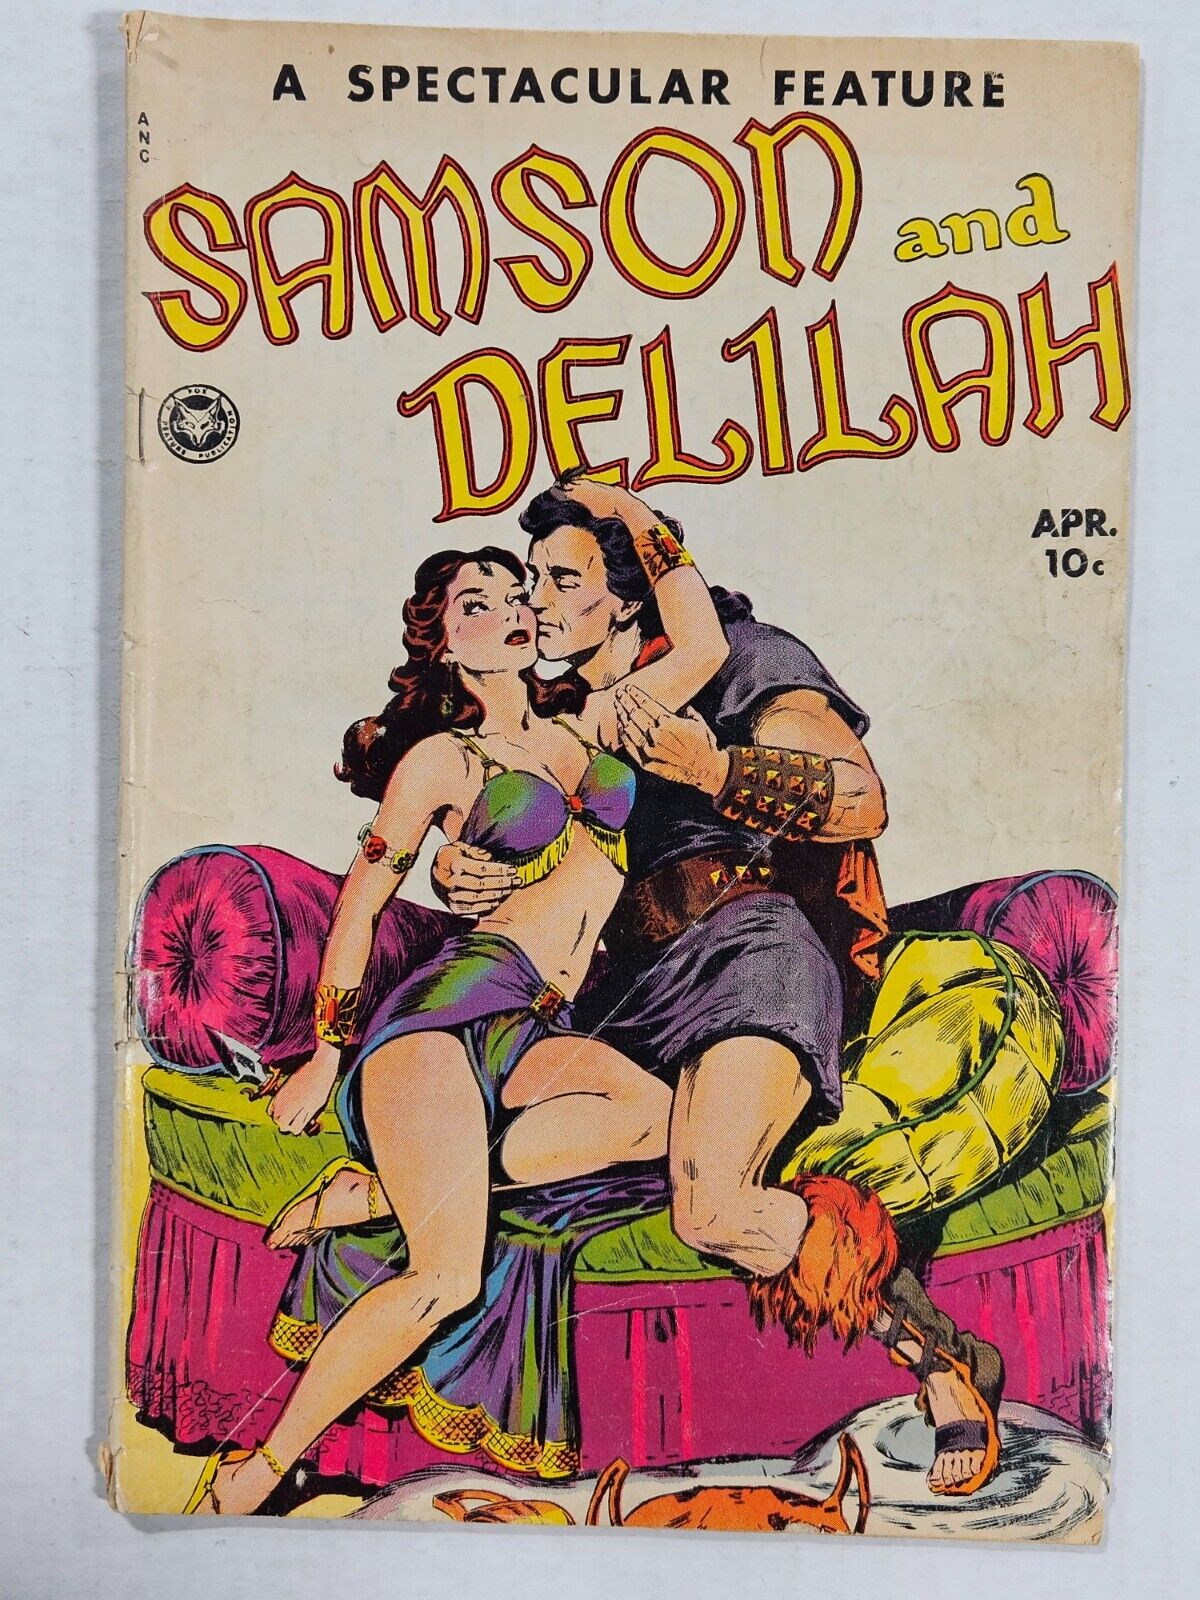 A Spectacular Feature: Samson and Delilah (1950)